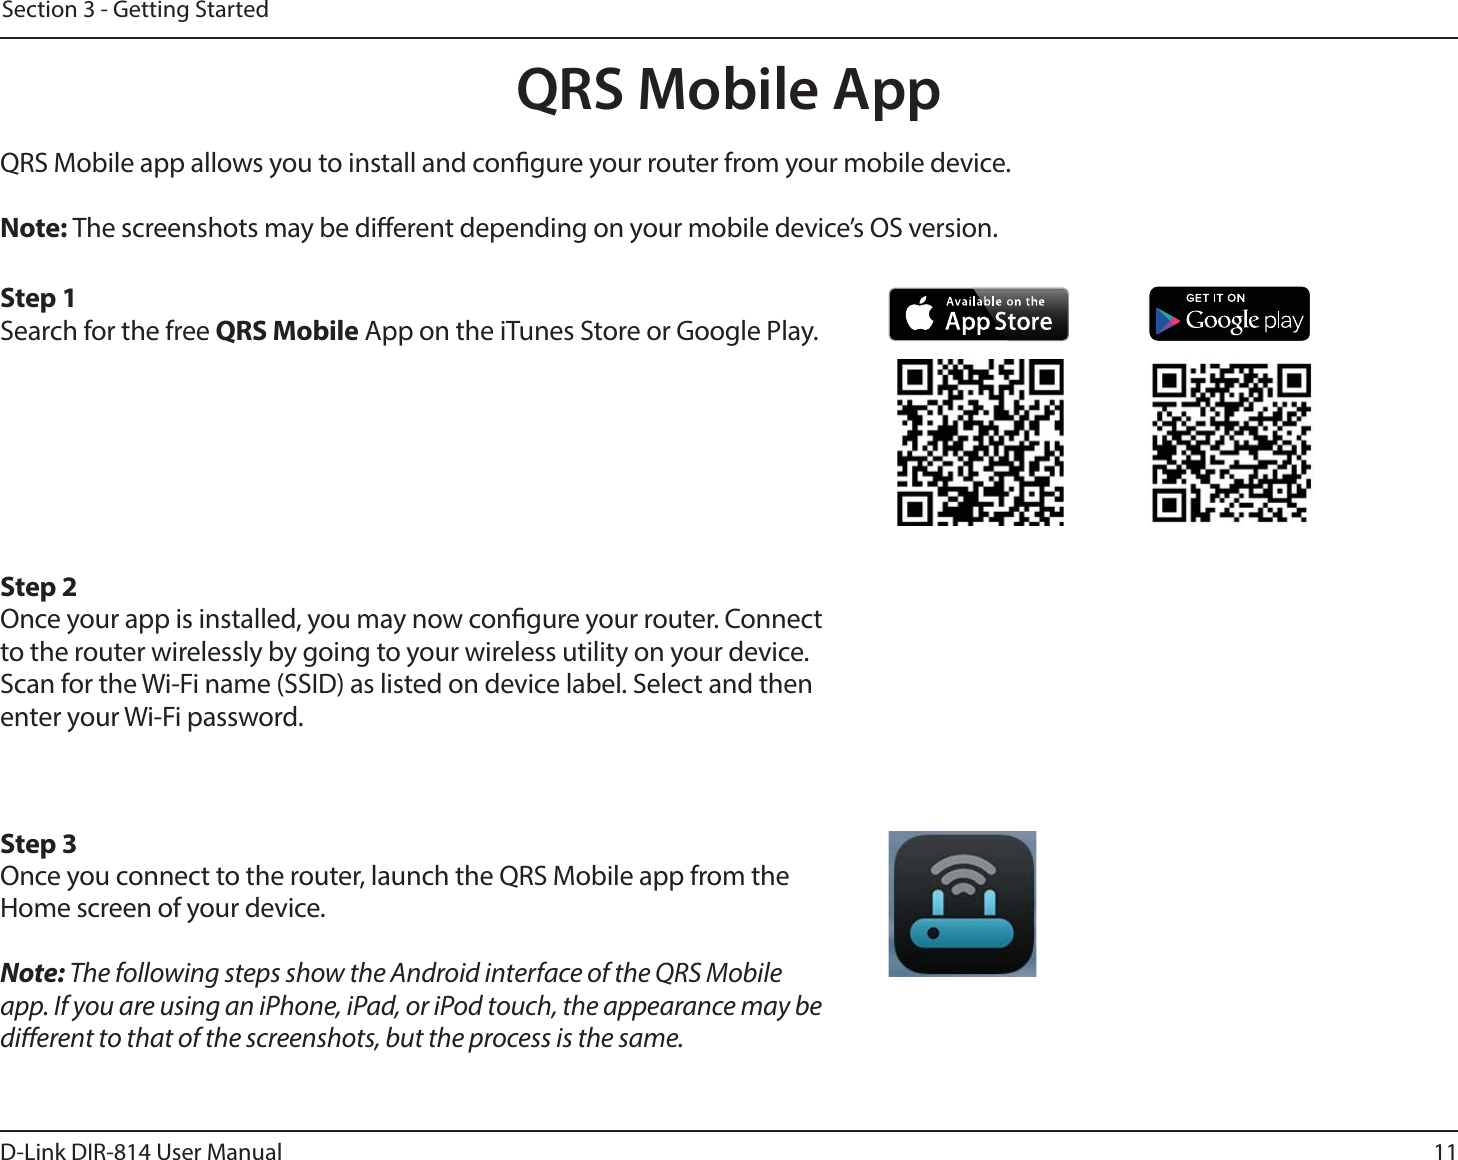 11D-Link DIR-814 User ManualSection 3 - Getting StartedQRS Mobile AppQRS Mobile app allows you to install and congure your router from your mobile device.Note: The screenshots may be dierent depending on your mobile device’s OS version. Step 1Search for the free QRS Mobile App on the iTunes Store or Google Play.Step 2Once your app is installed, you may now congure your router. Connect to the router wirelessly by going to your wireless utility on your device. Scan for the Wi-Fi name (SSID) as listed on device label. Select and then enter your Wi-Fi password.Step 3Once you connect to the router, launch the QRS Mobile app from the Home screen of your device.Note: The following steps show the Android interface of the QRS Mobile app. If you are using an iPhone, iPad, or iPod touch, the appearance may be dierent to that of the screenshots, but the process is the same.